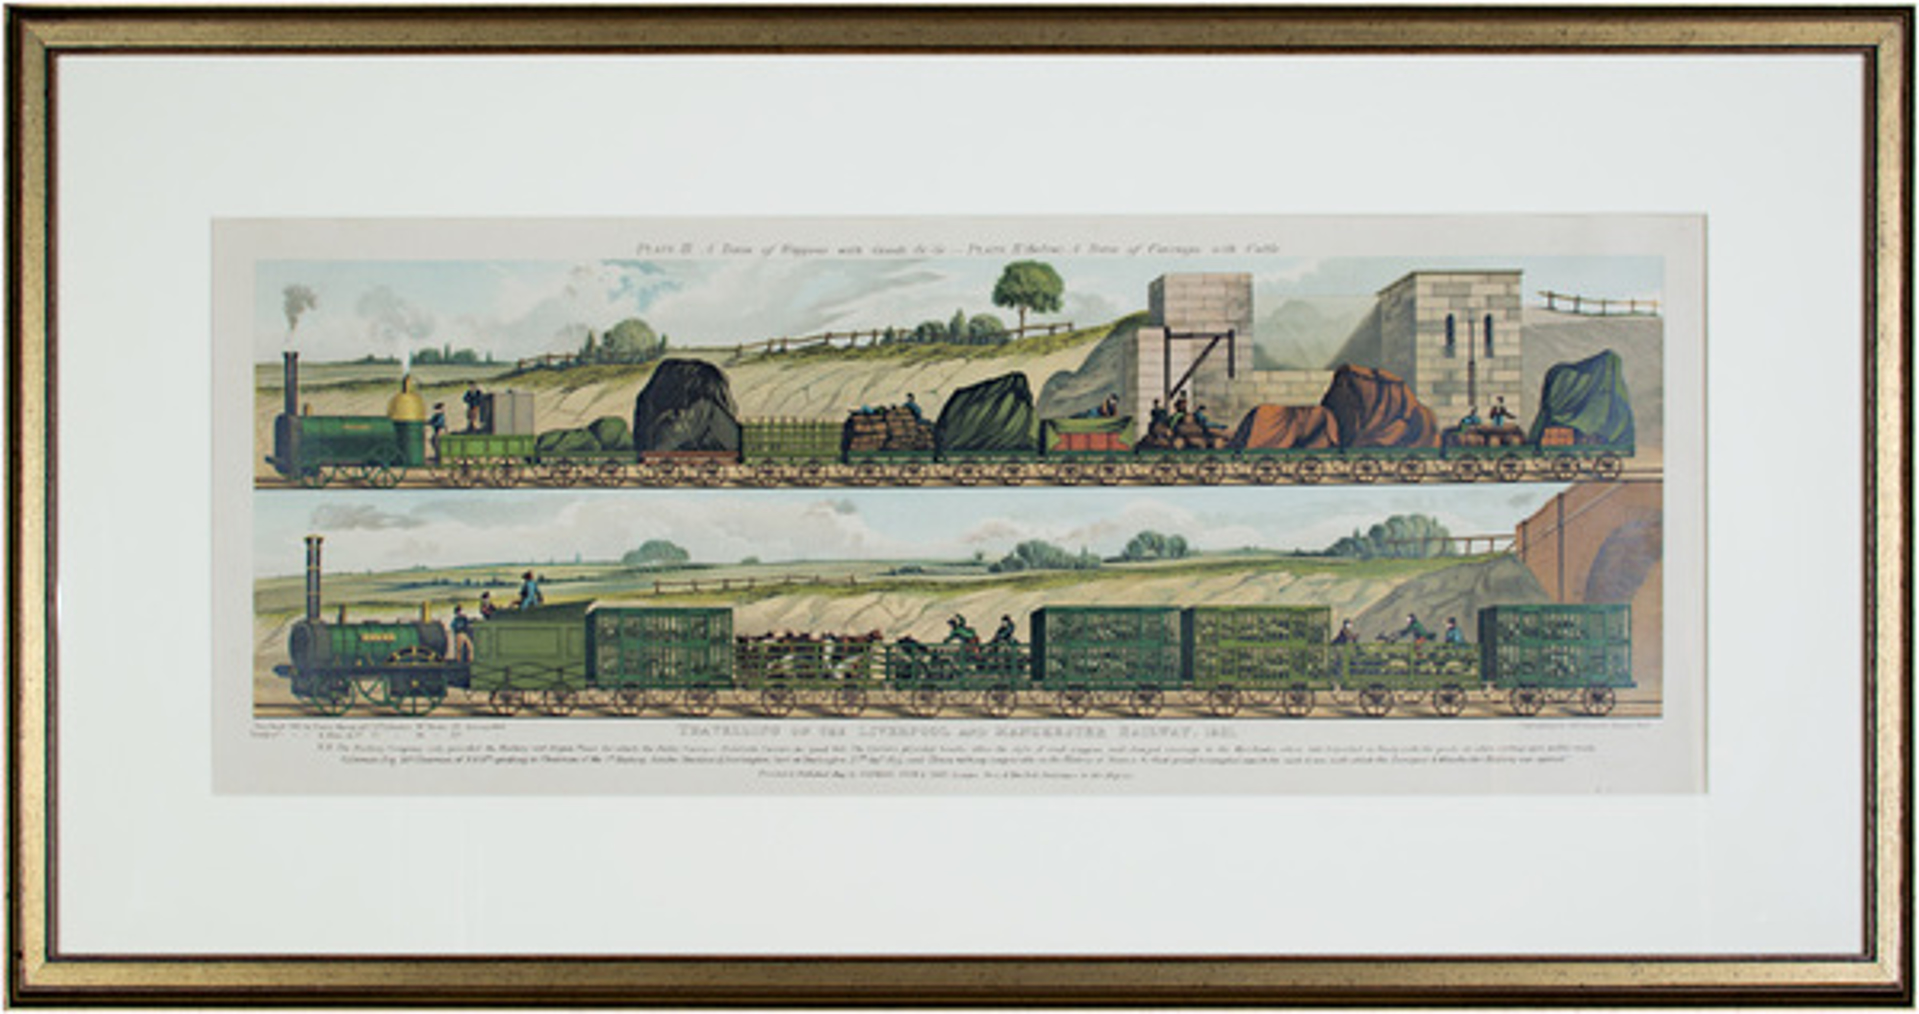 Traveling on the Liverpool & Manchester Railroad, 1831 (train) by Raphael Tuck & Sons